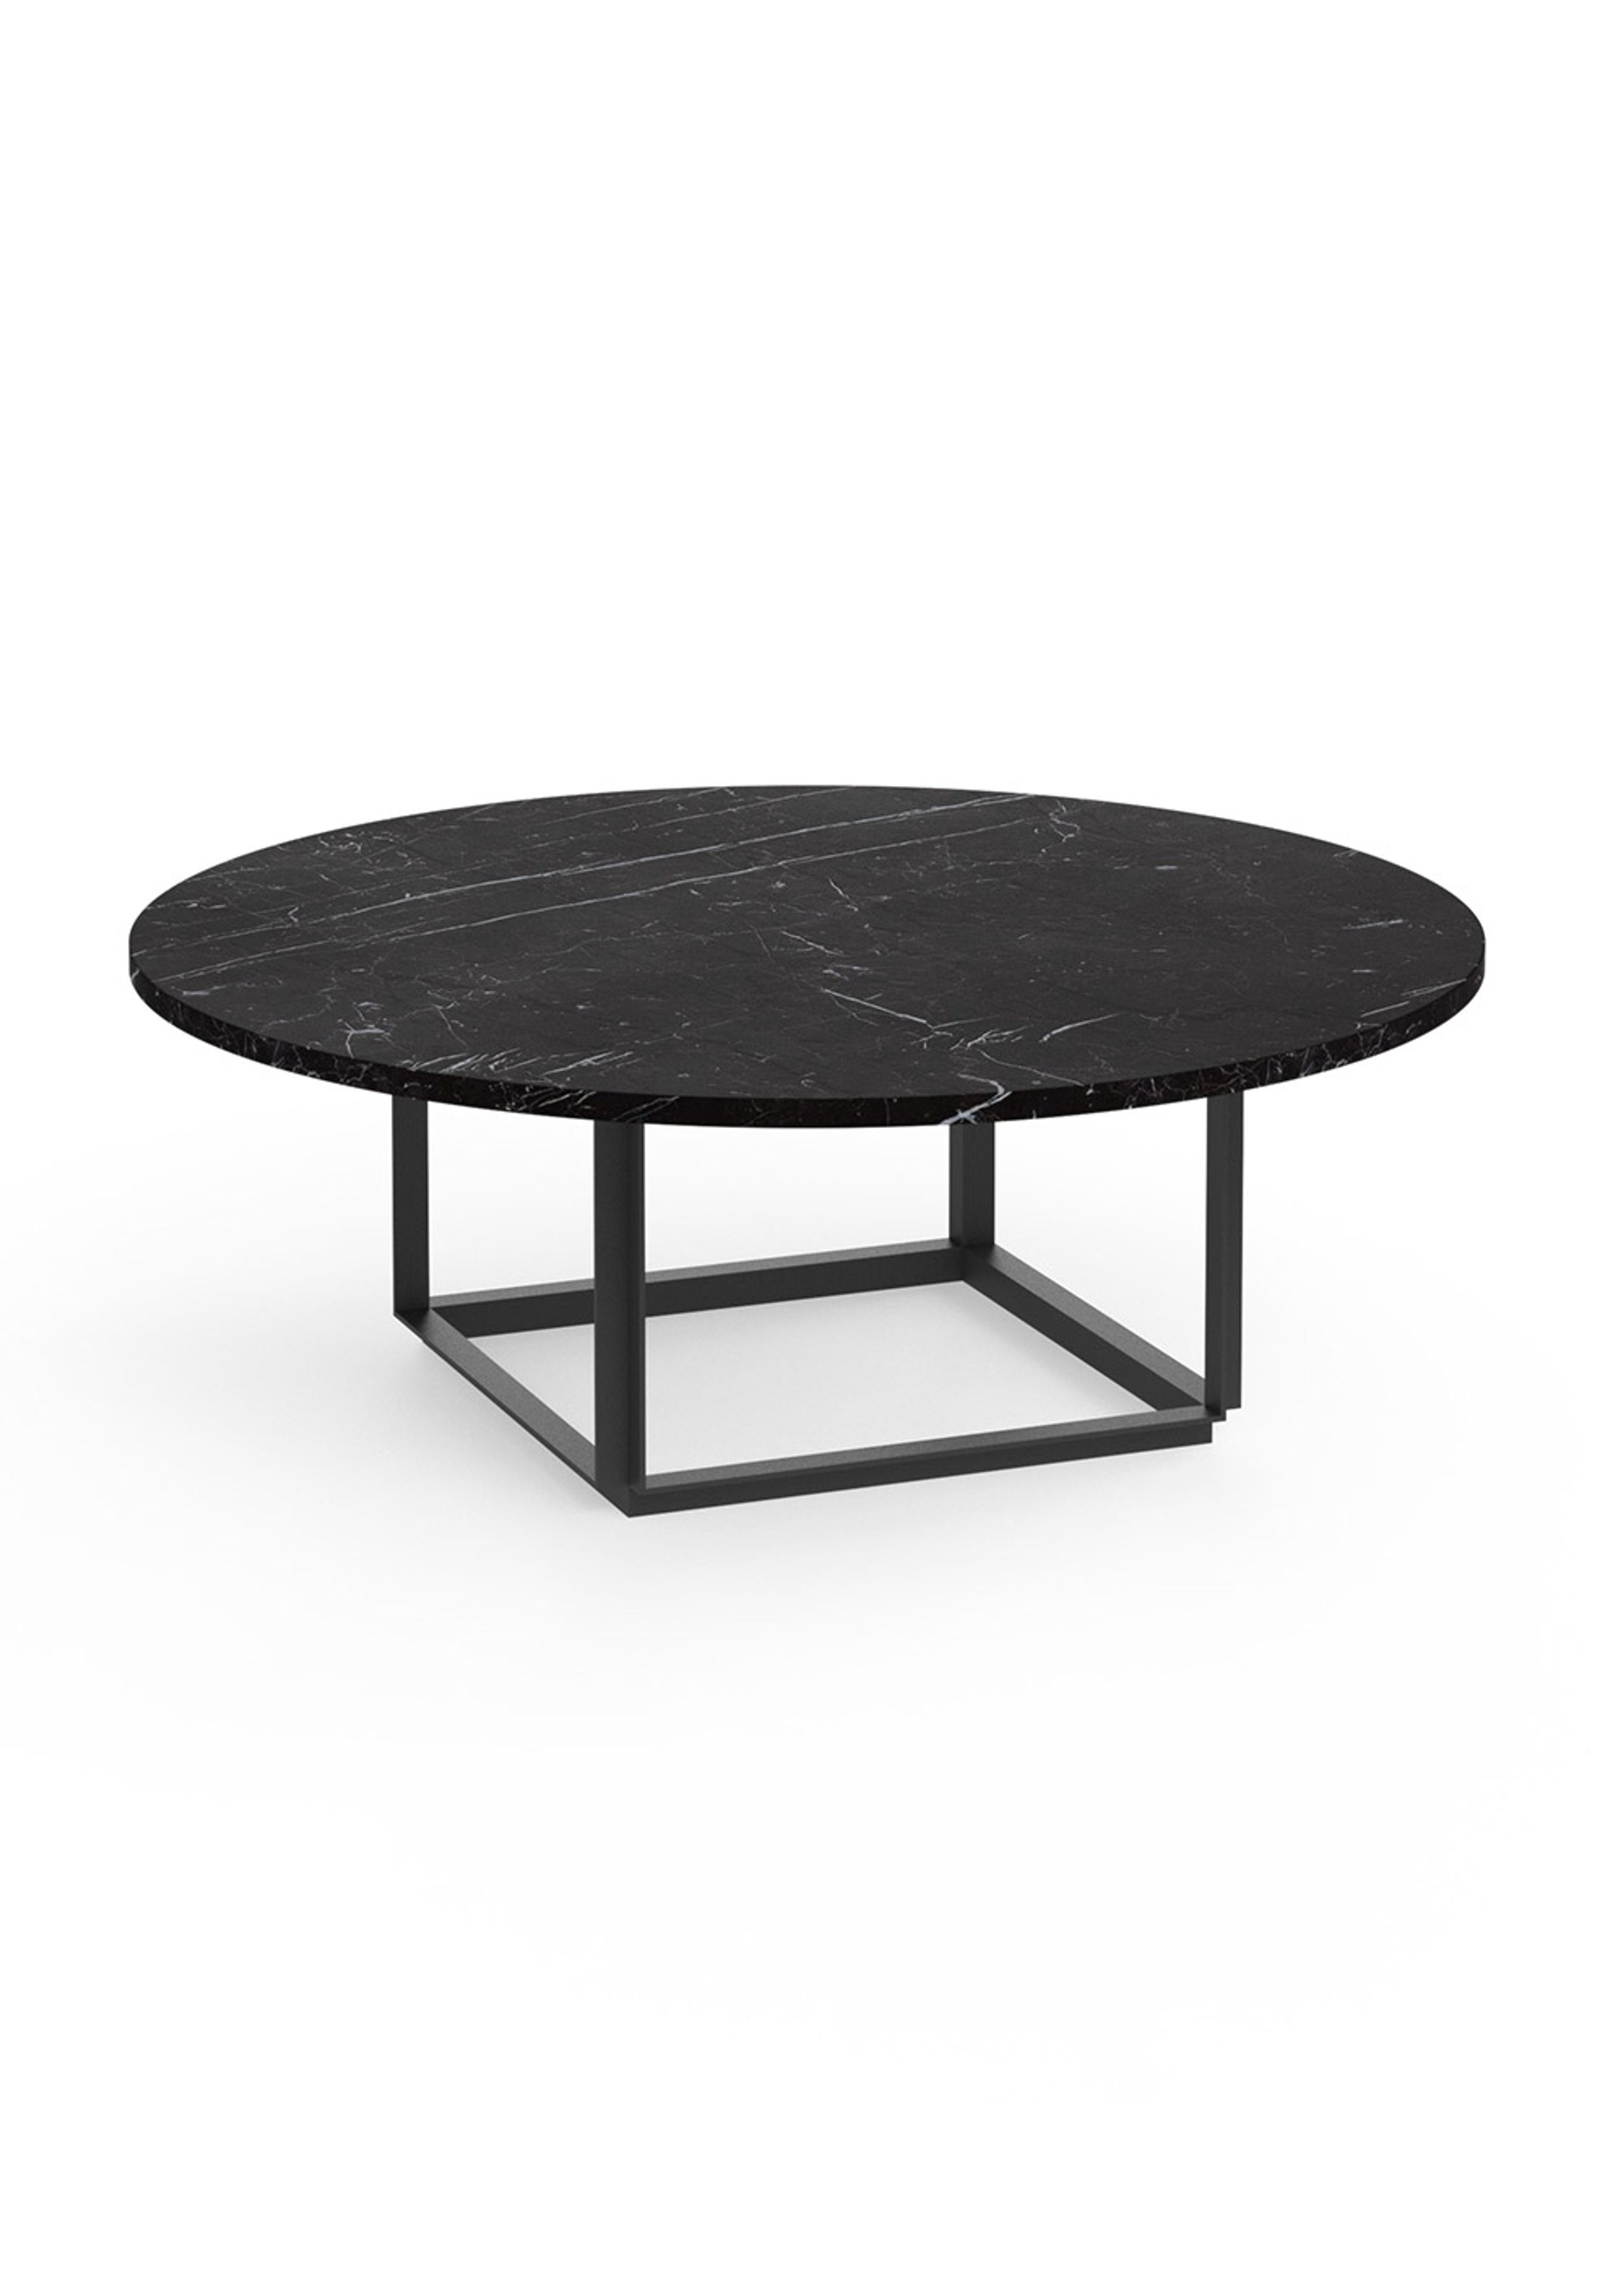 New Works - Couchtisch - Florence Coffee Table - Black Marquina Marble w. Black Frame